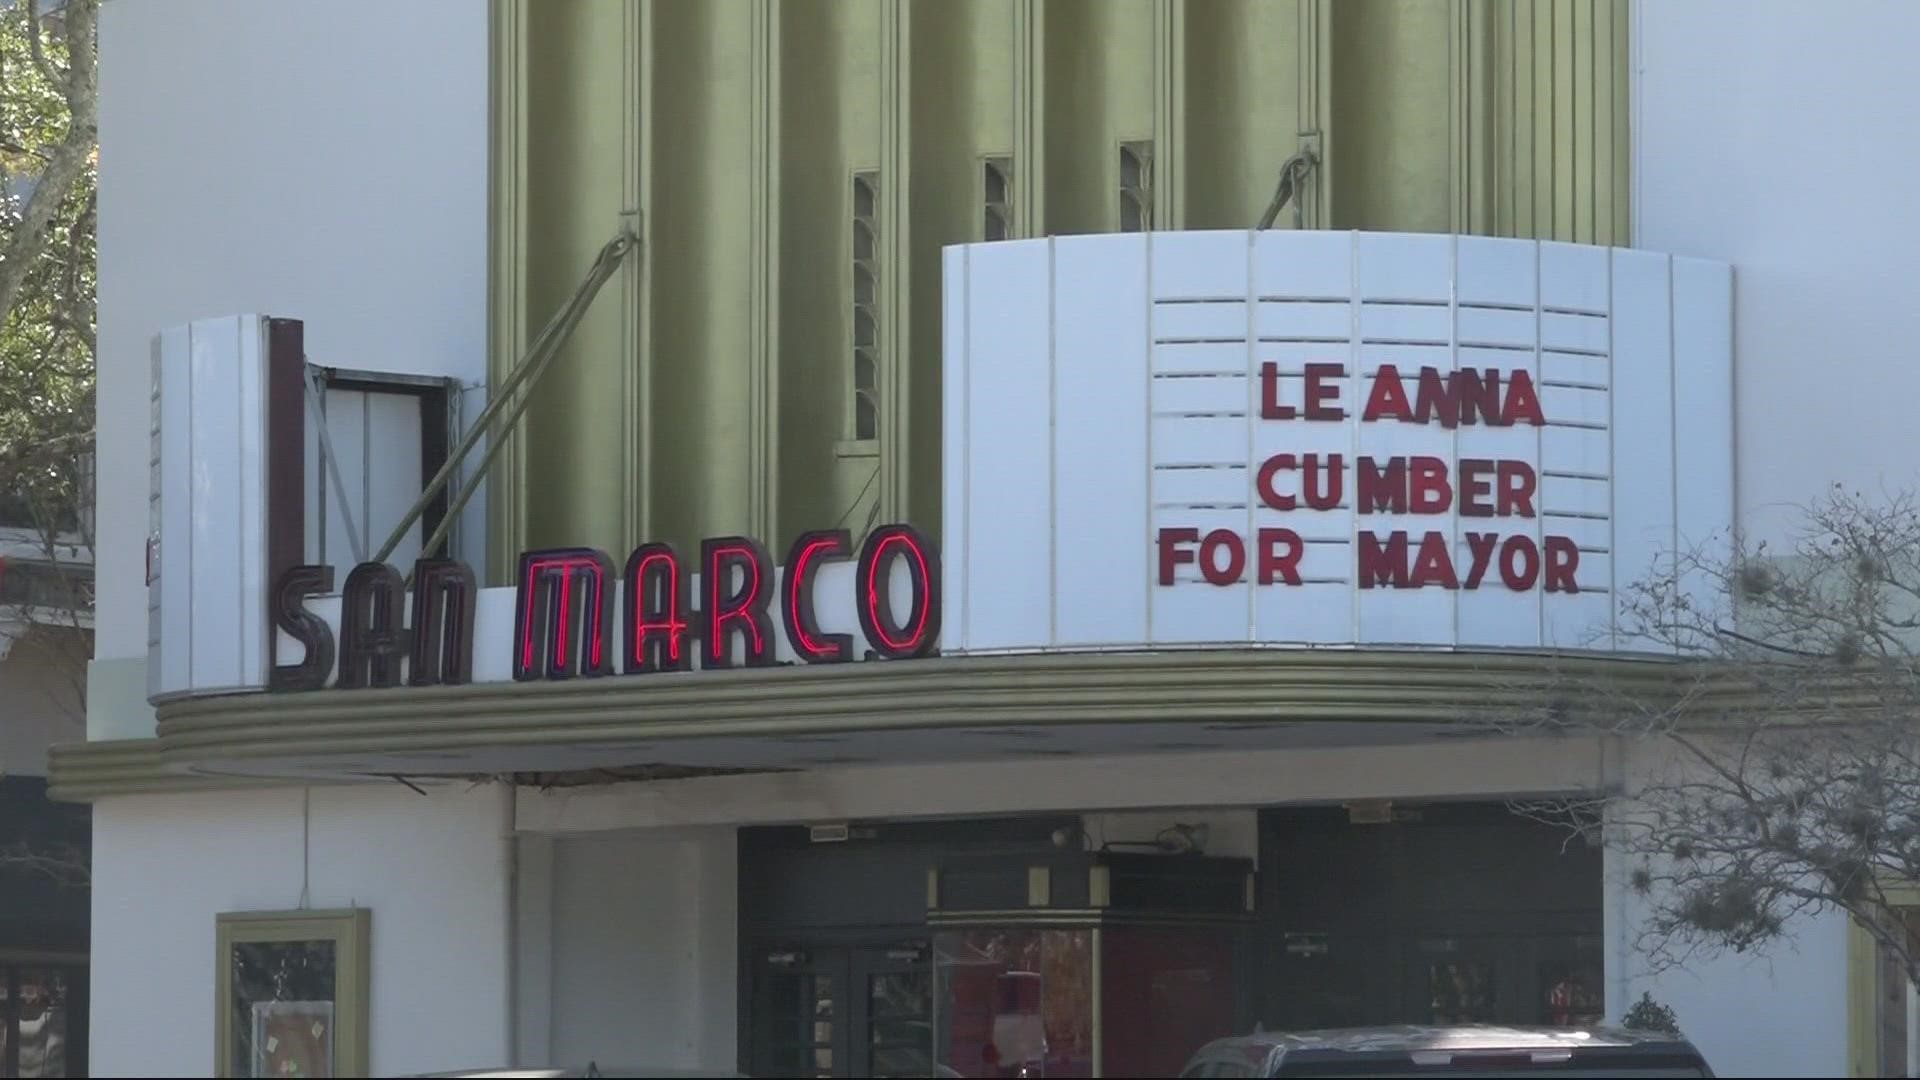 The marquee on the San Marco Theater caught some people off guard, but not for Lindsey Martin who loves and visits the San Marco area frequently.